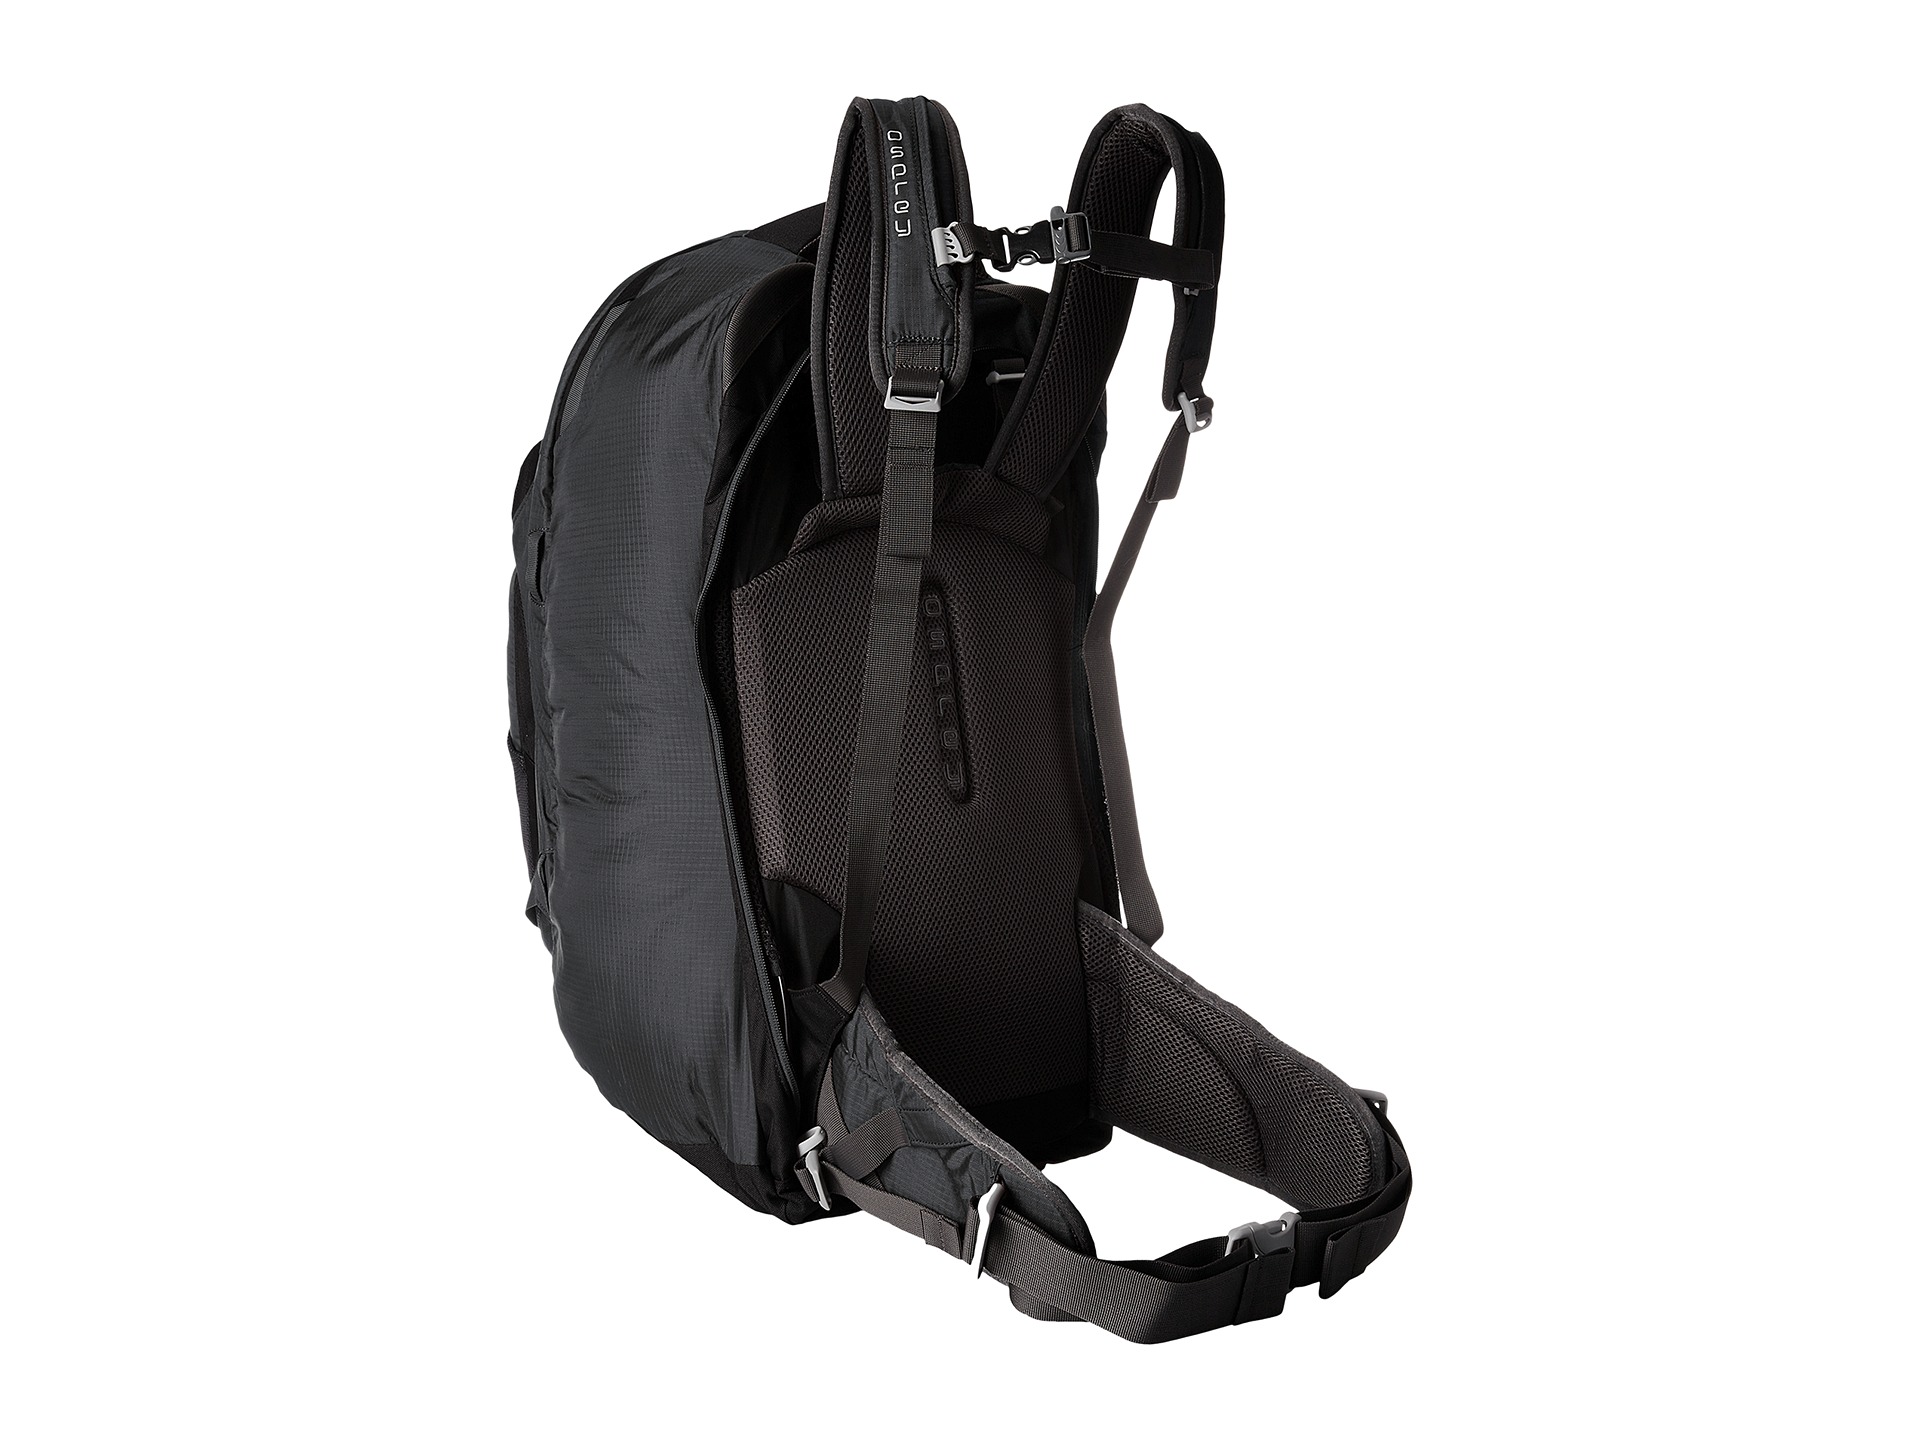 Osprey Farpoint 55 | Shipped Free at Zappos